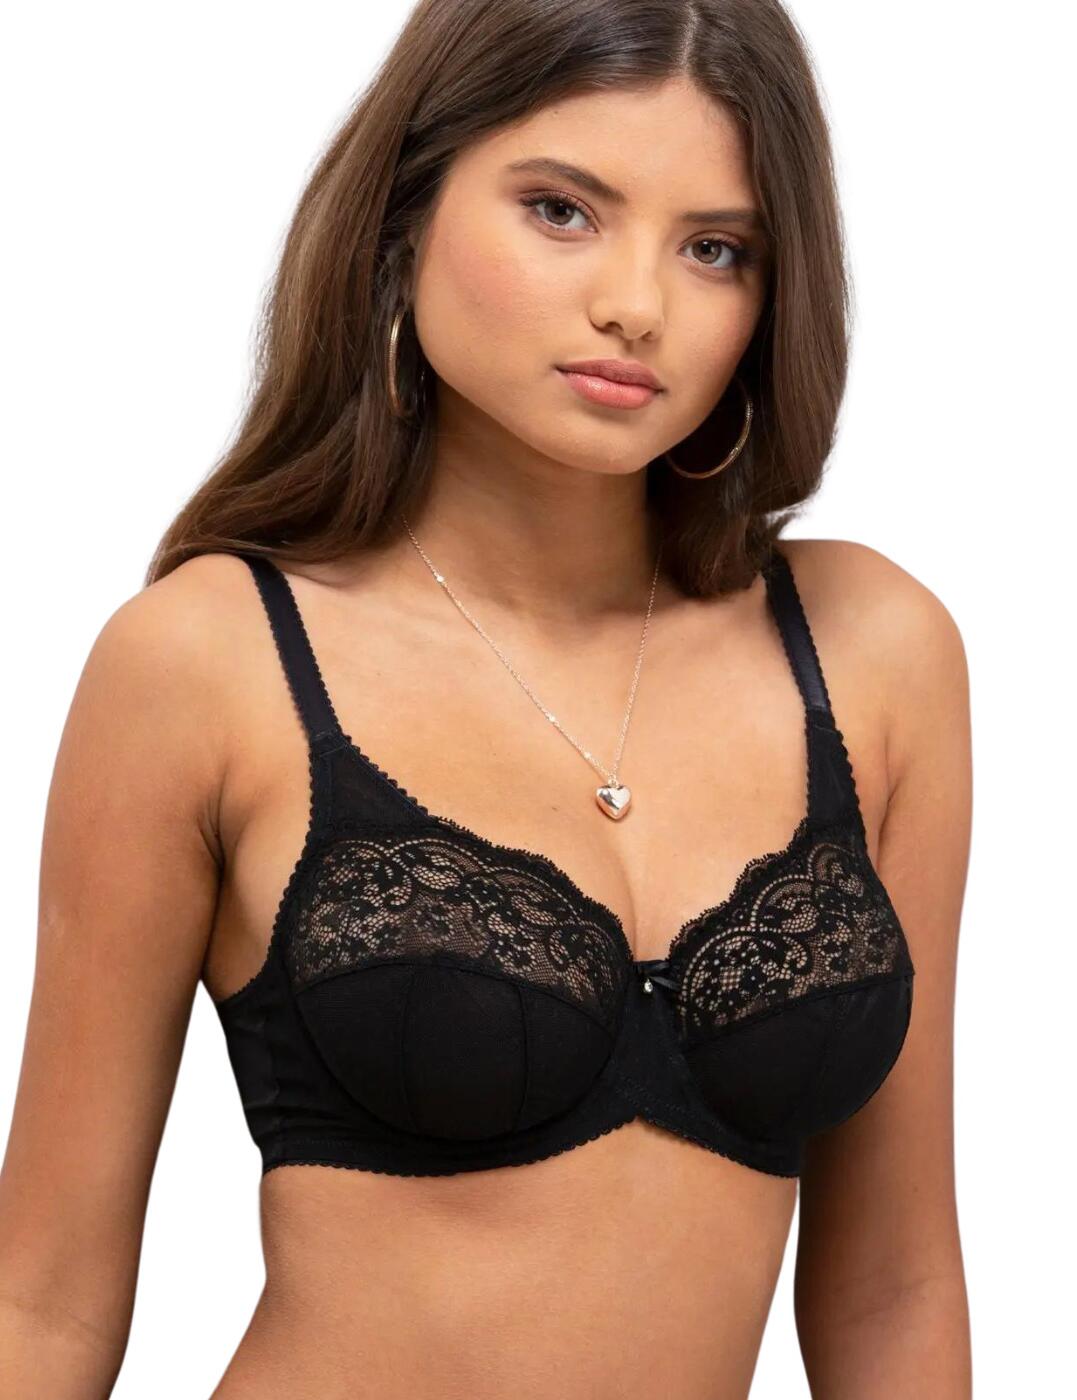 Charnos Opera Full Cup Bra 182301 Underwired Supportive Non-Padded